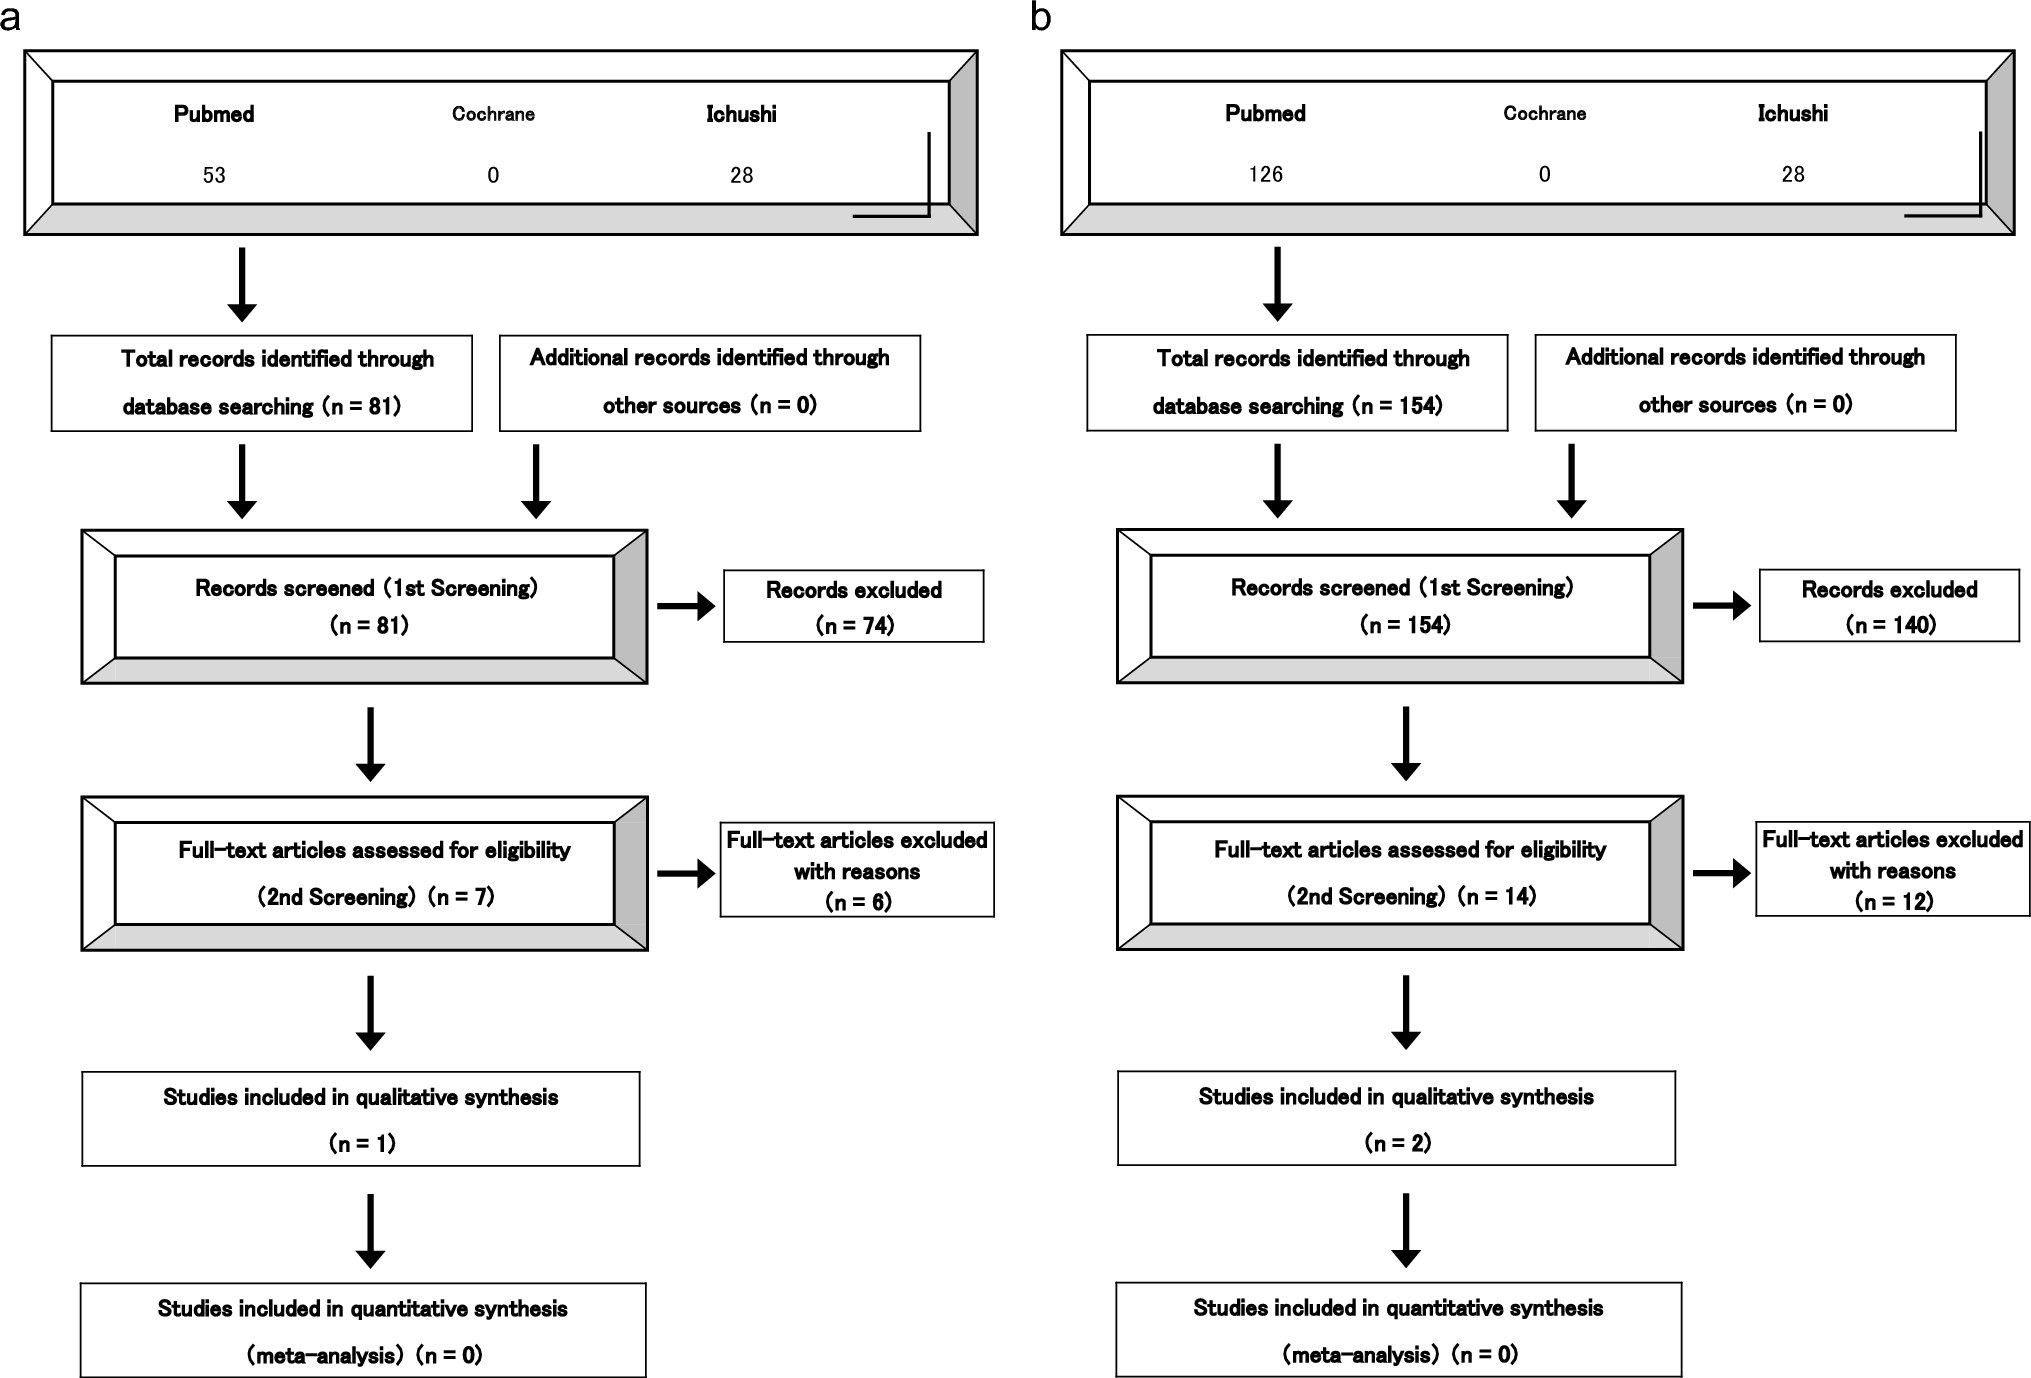 Primary prophylaxis with G-CSF for patients with non-round cell soft tissue sarcomas: a systematic review for the Clinical Practice Guidelines for the Use of G-CSF 2022 of the Japan Society of Clinical Oncology